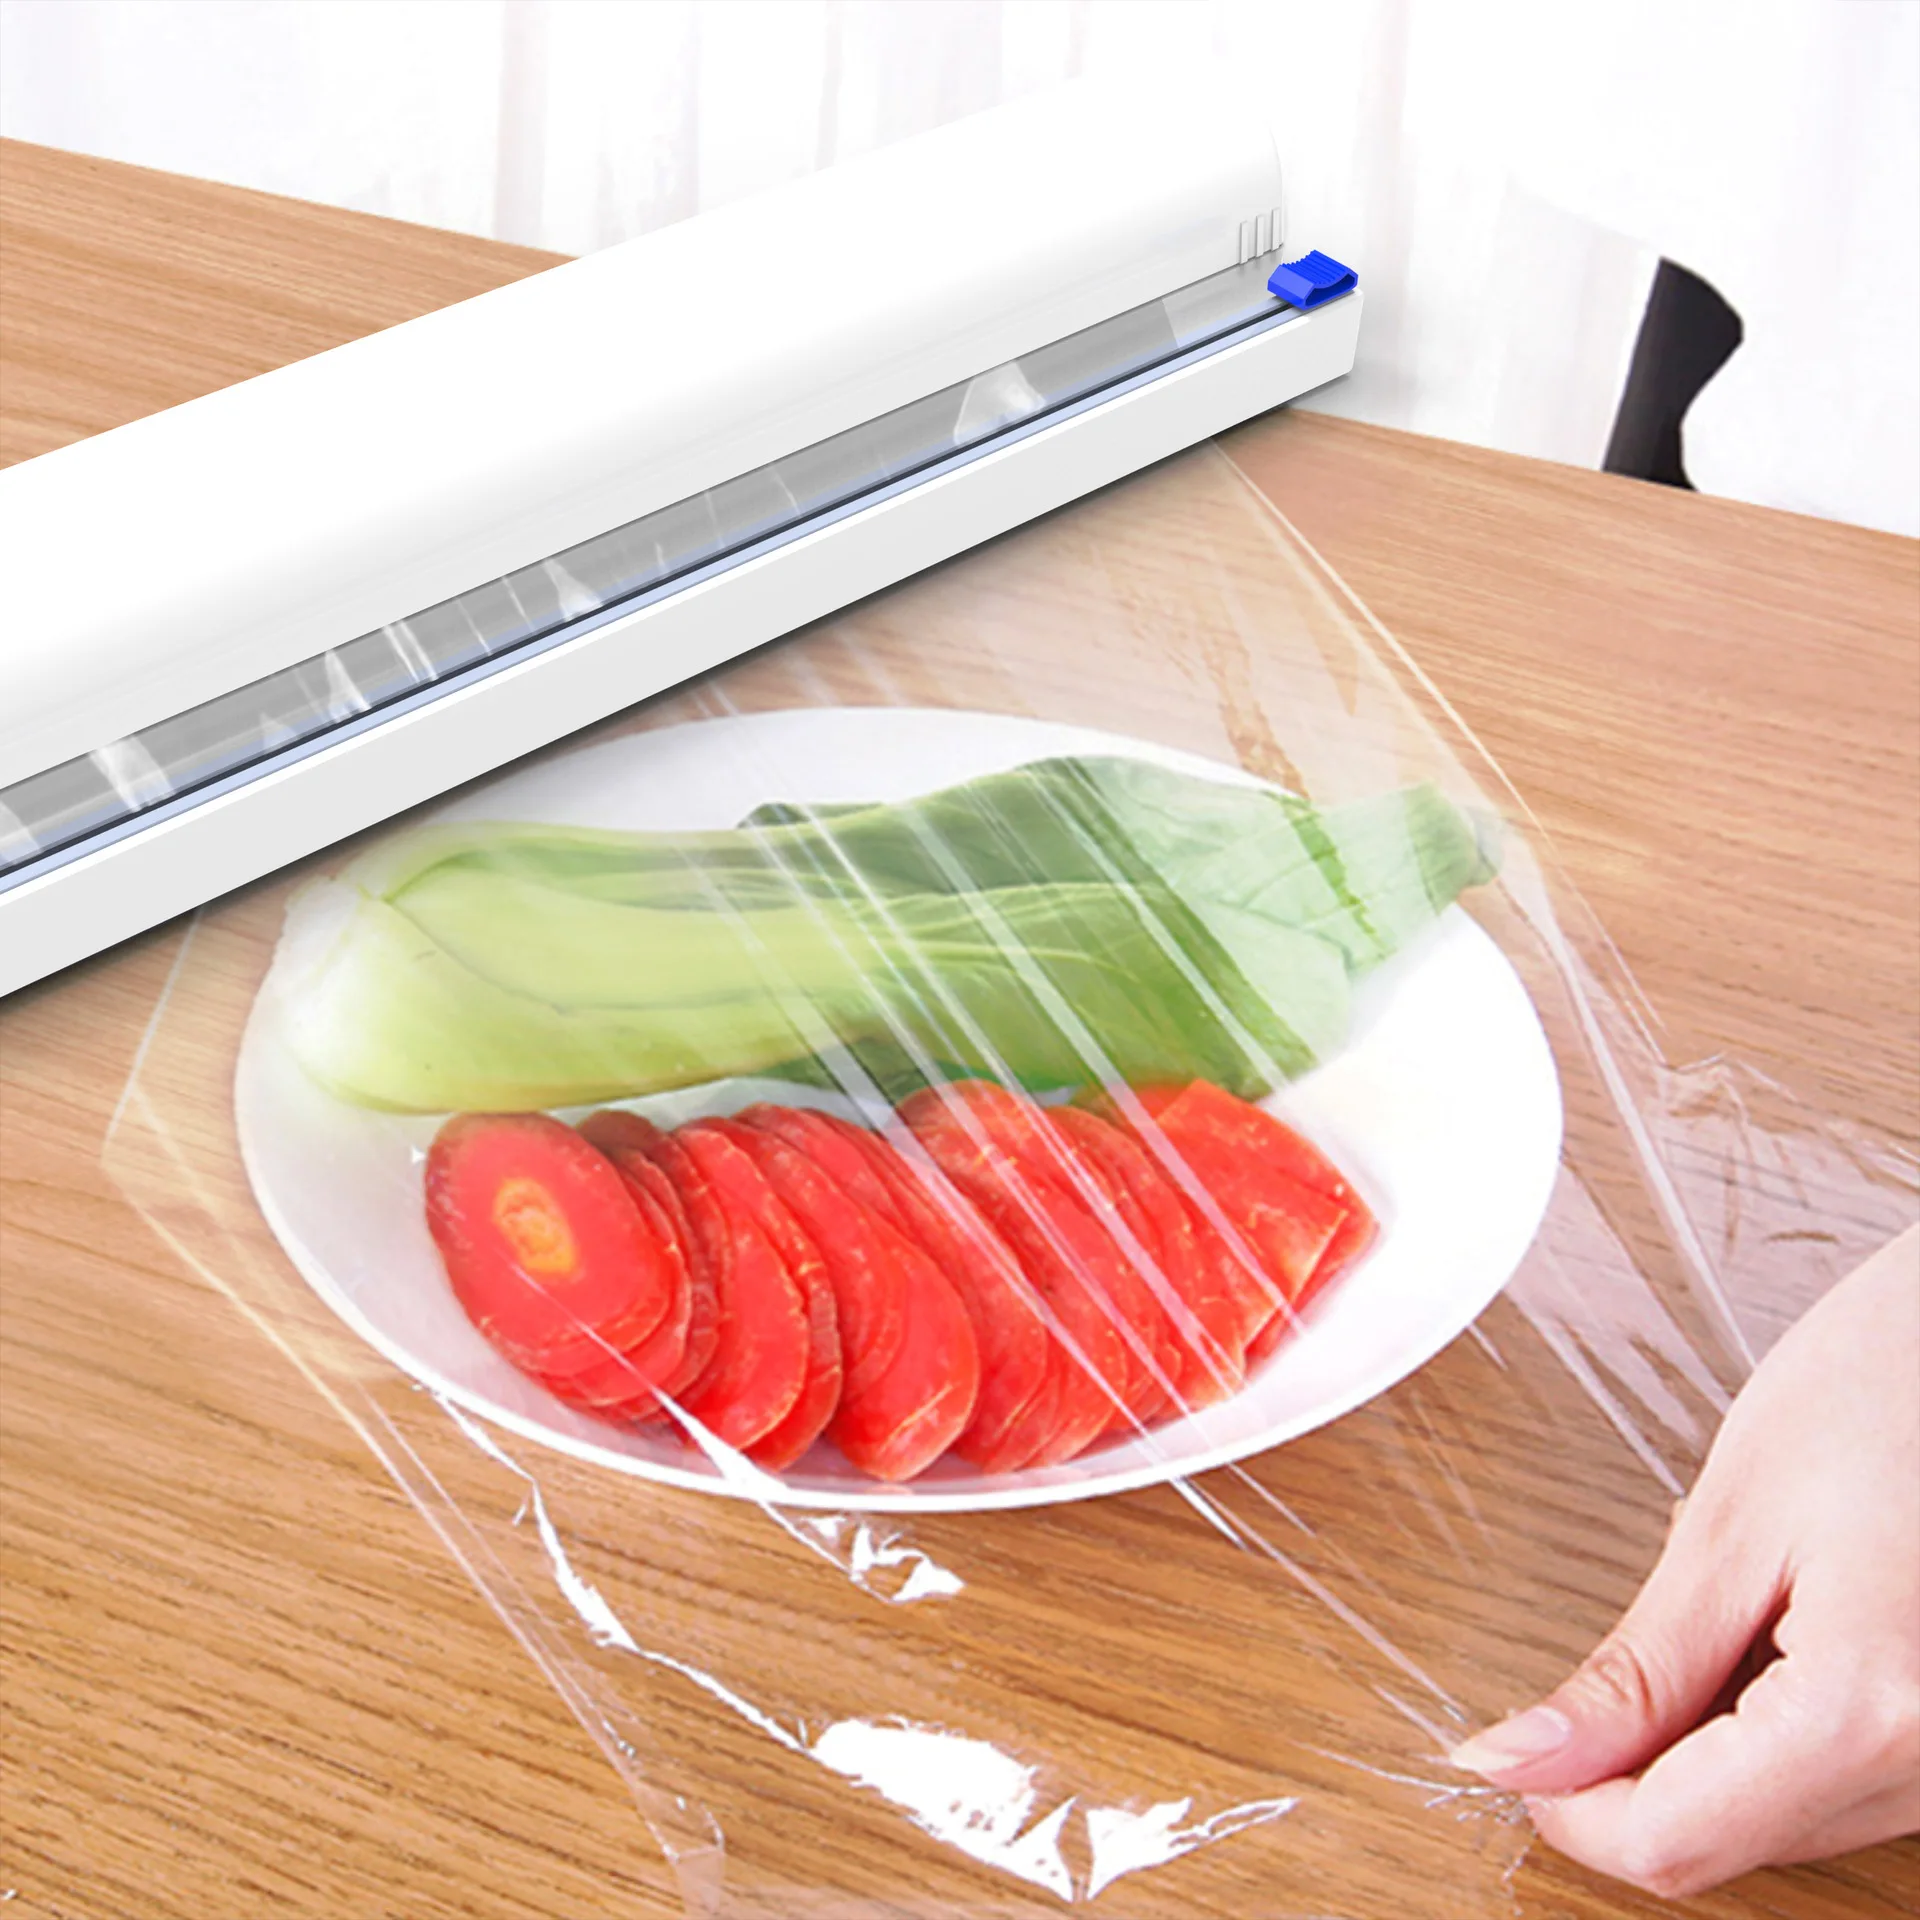 

Kichen Food Wrapping Pvc Stretch Cling Film Food Grade Jumbo Roll Kitchen Wrap Dispenser, White or customized